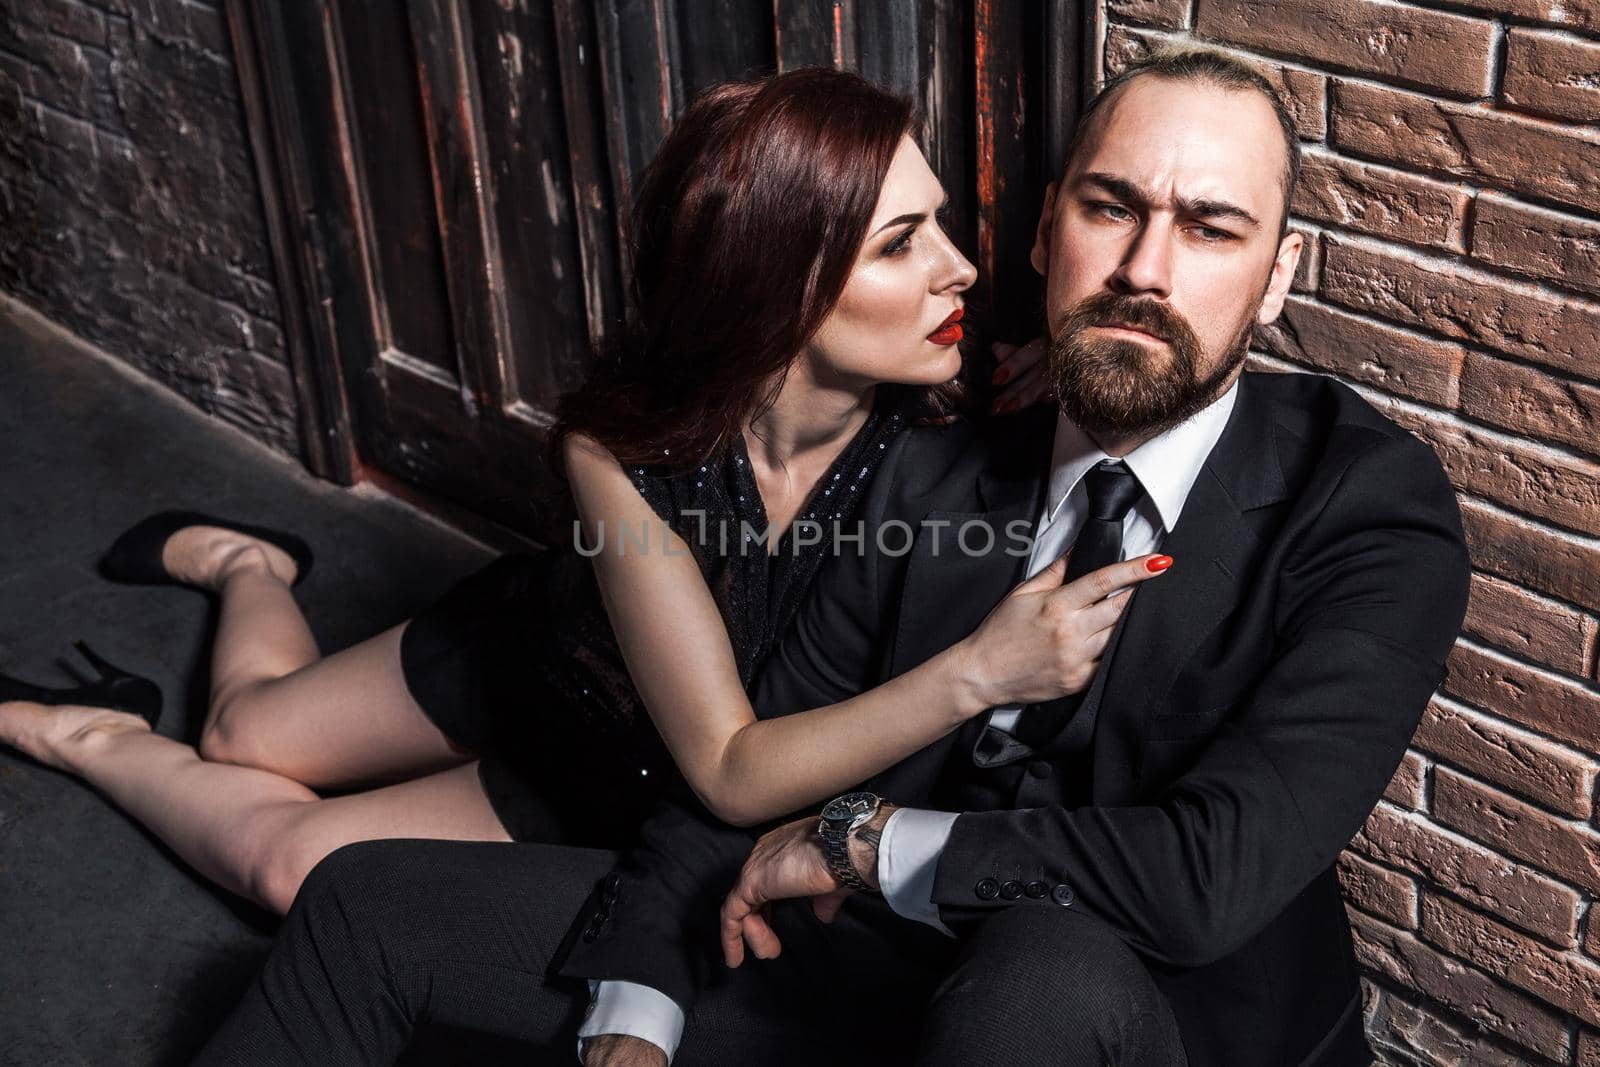 Man in suit and woman in black evening dress sitting on his lap. Foxy woman looks at him and wants to kiss. Studio shot, isolated on brick background